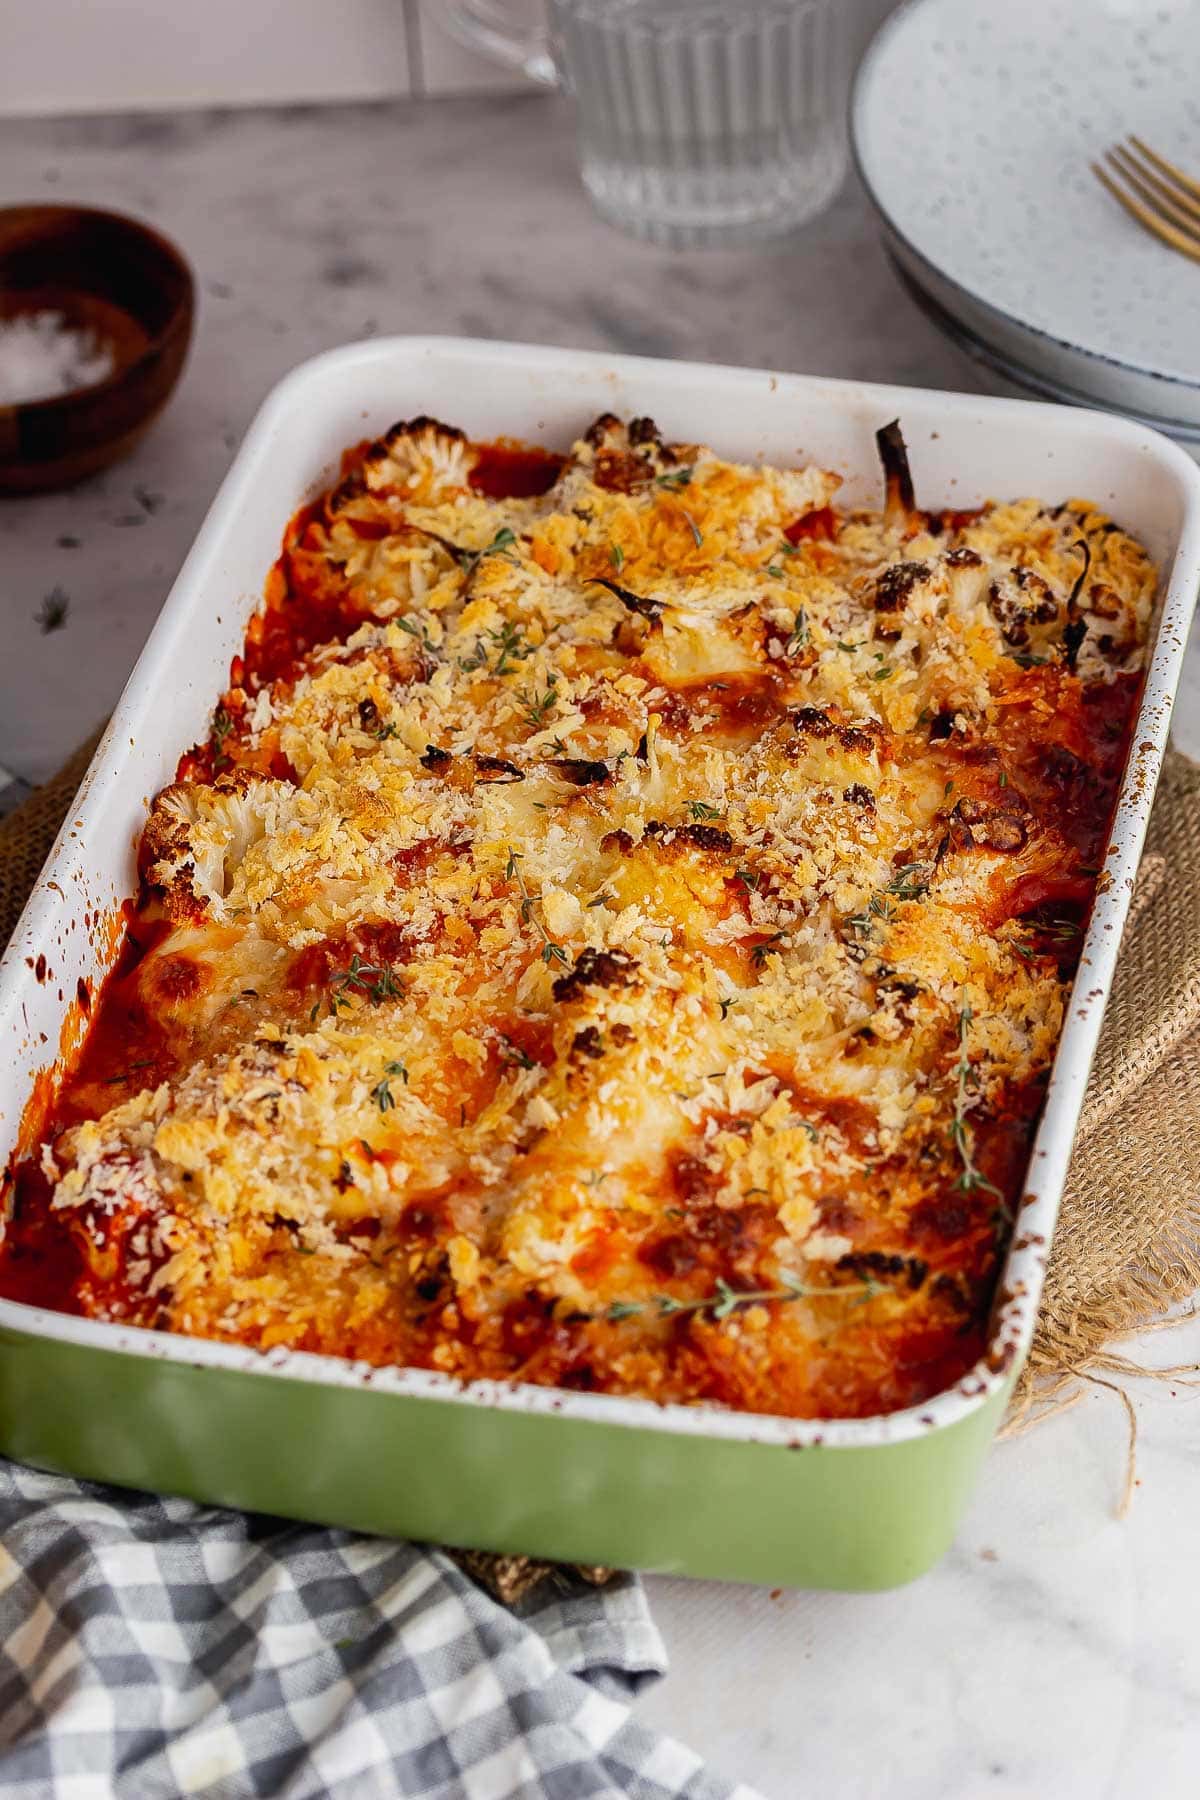 Greek baking dish of cauliflower cheese bake with a checked cloth